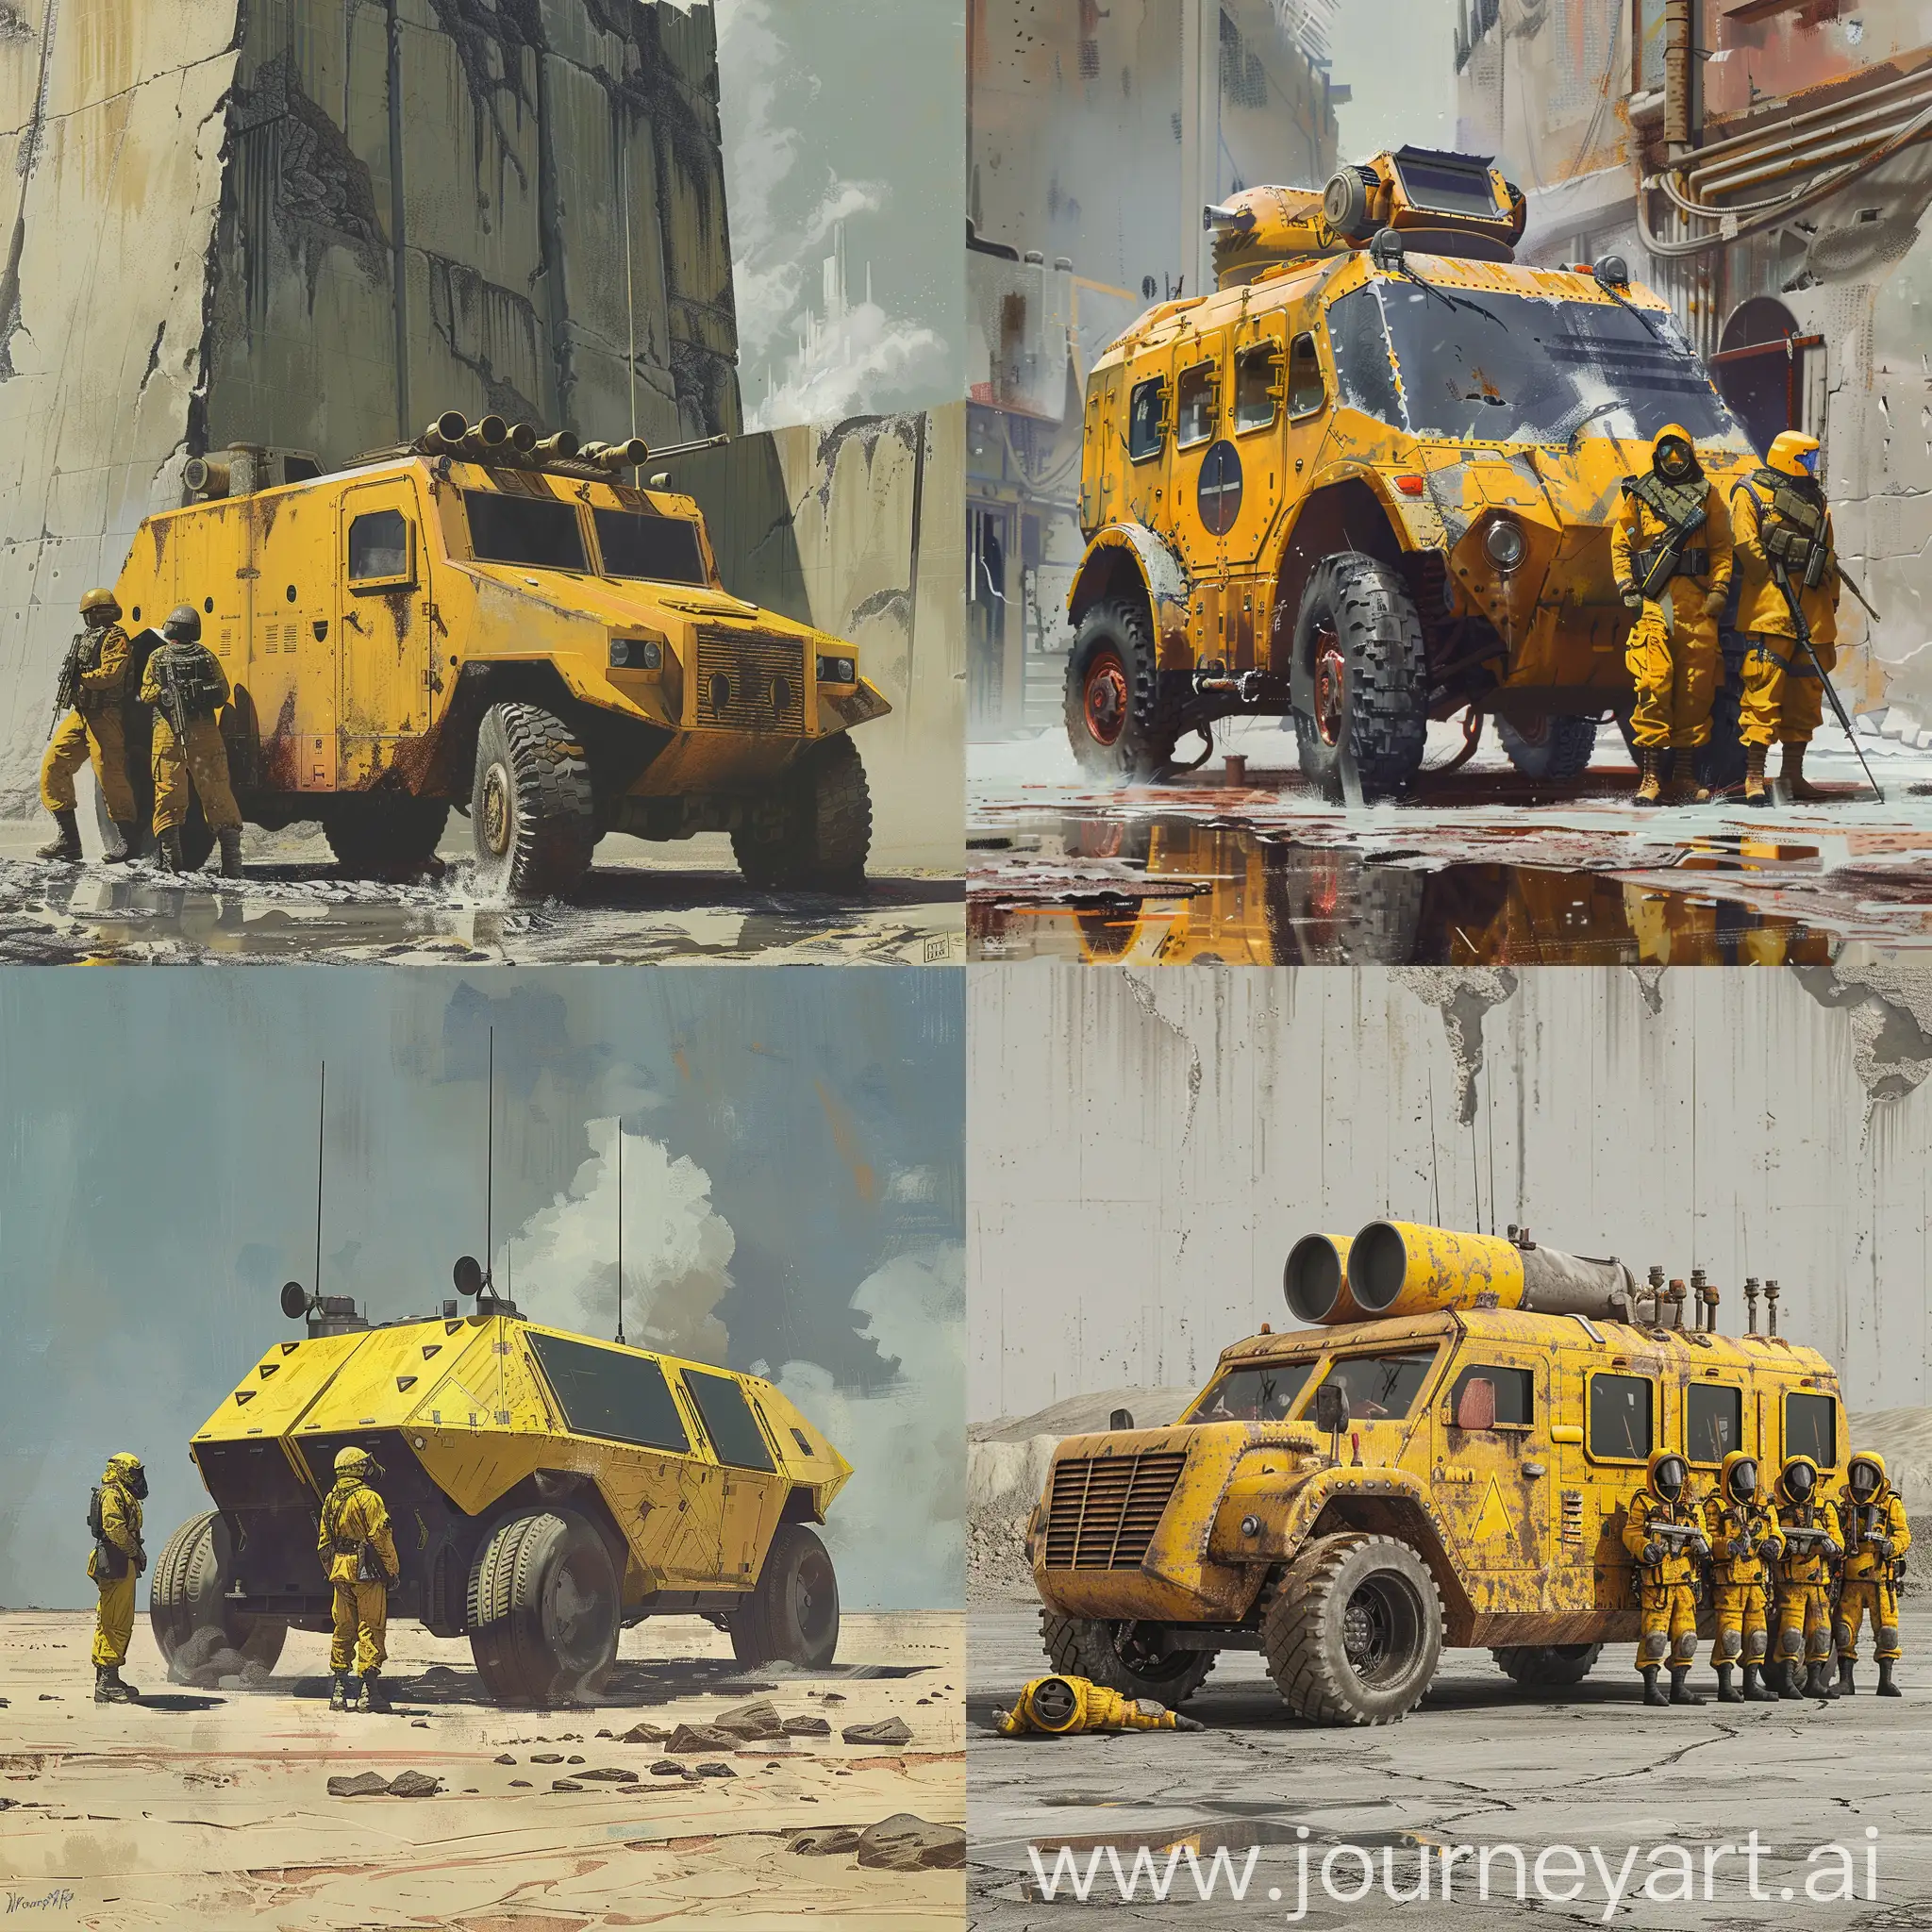 Fantasy-Armored-Vehicle-with-Soldiers-in-Yellow-Uniforms